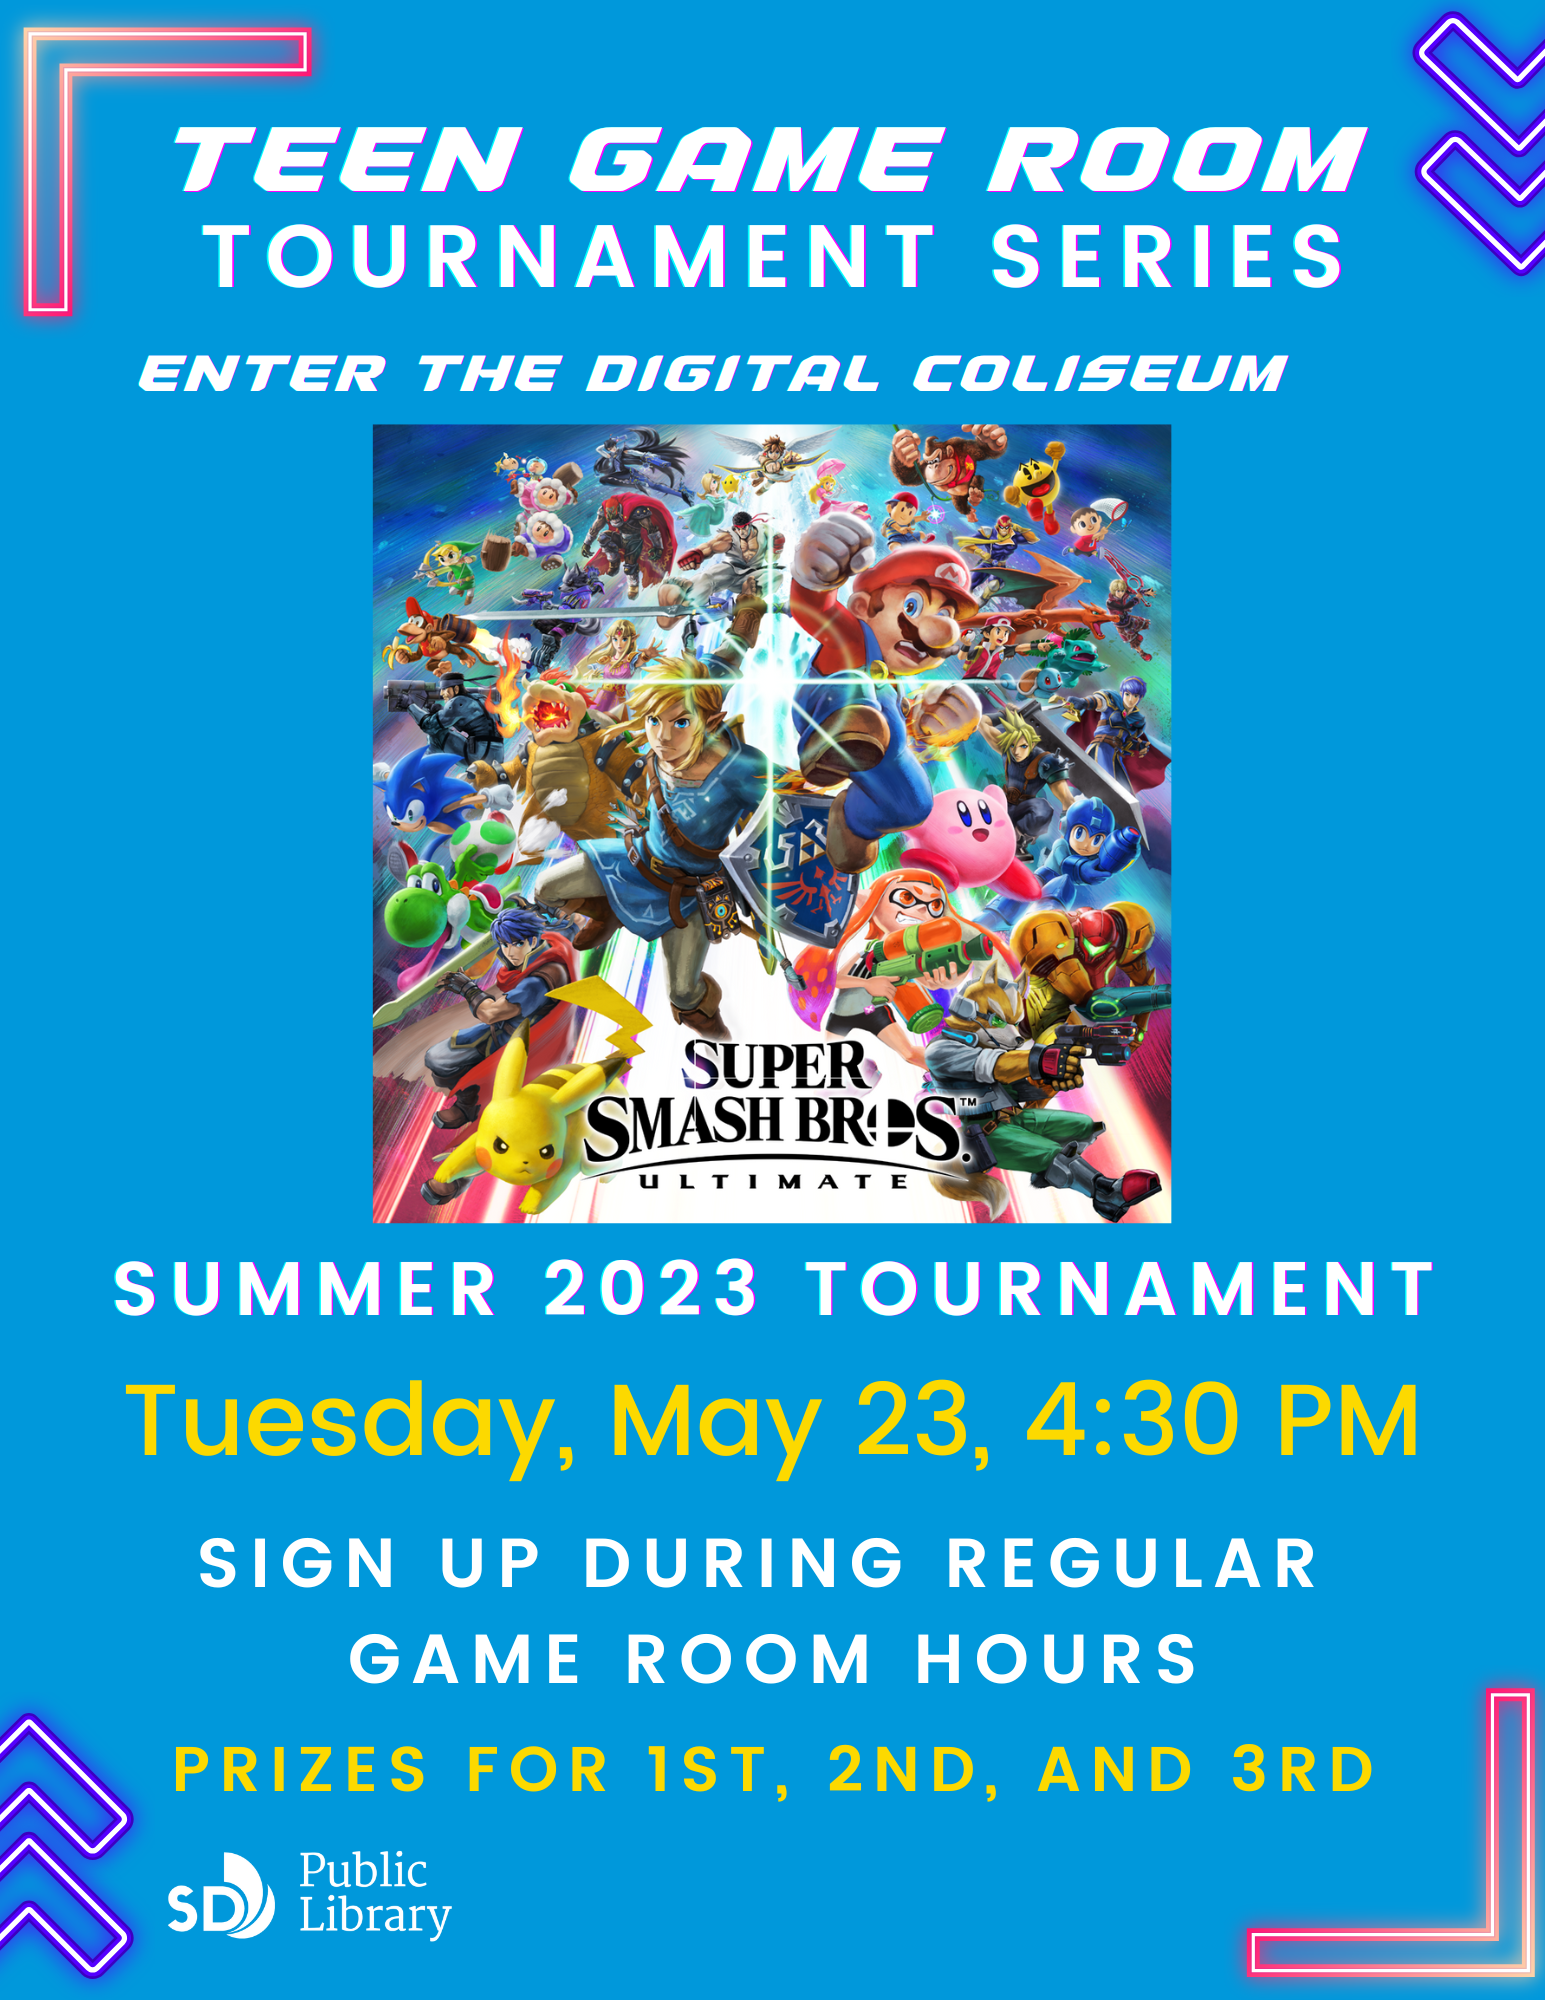 Teen Game Room Tournament Series. Enter the digital coliseum. Super Smash Bros Ultimate Summer 2023 Tournament. Tuesday, May 23, 4:30PM. Sign up during regular game room hours (Monday-Thursday, 4 PM to 5:45 PM).